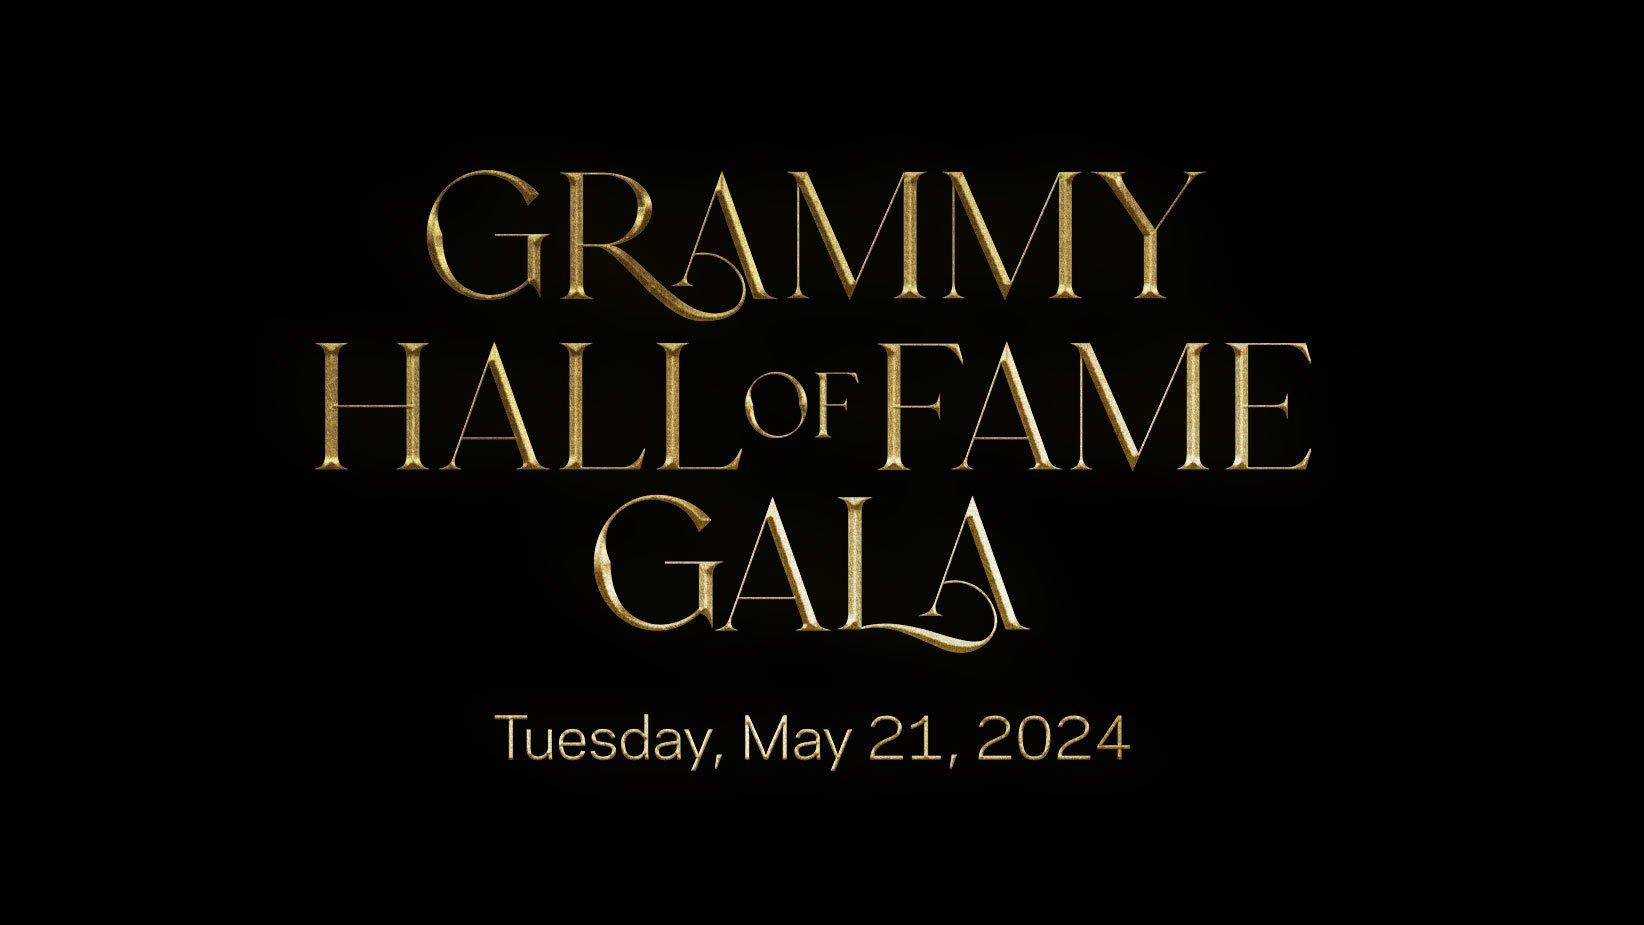 The GRAMMY Hall Of Fame returns to celebrate its 50th anniversary with an inaugural gala and concert taking place Tuesday, May 21, at the NOVO Theater in Los Angeles